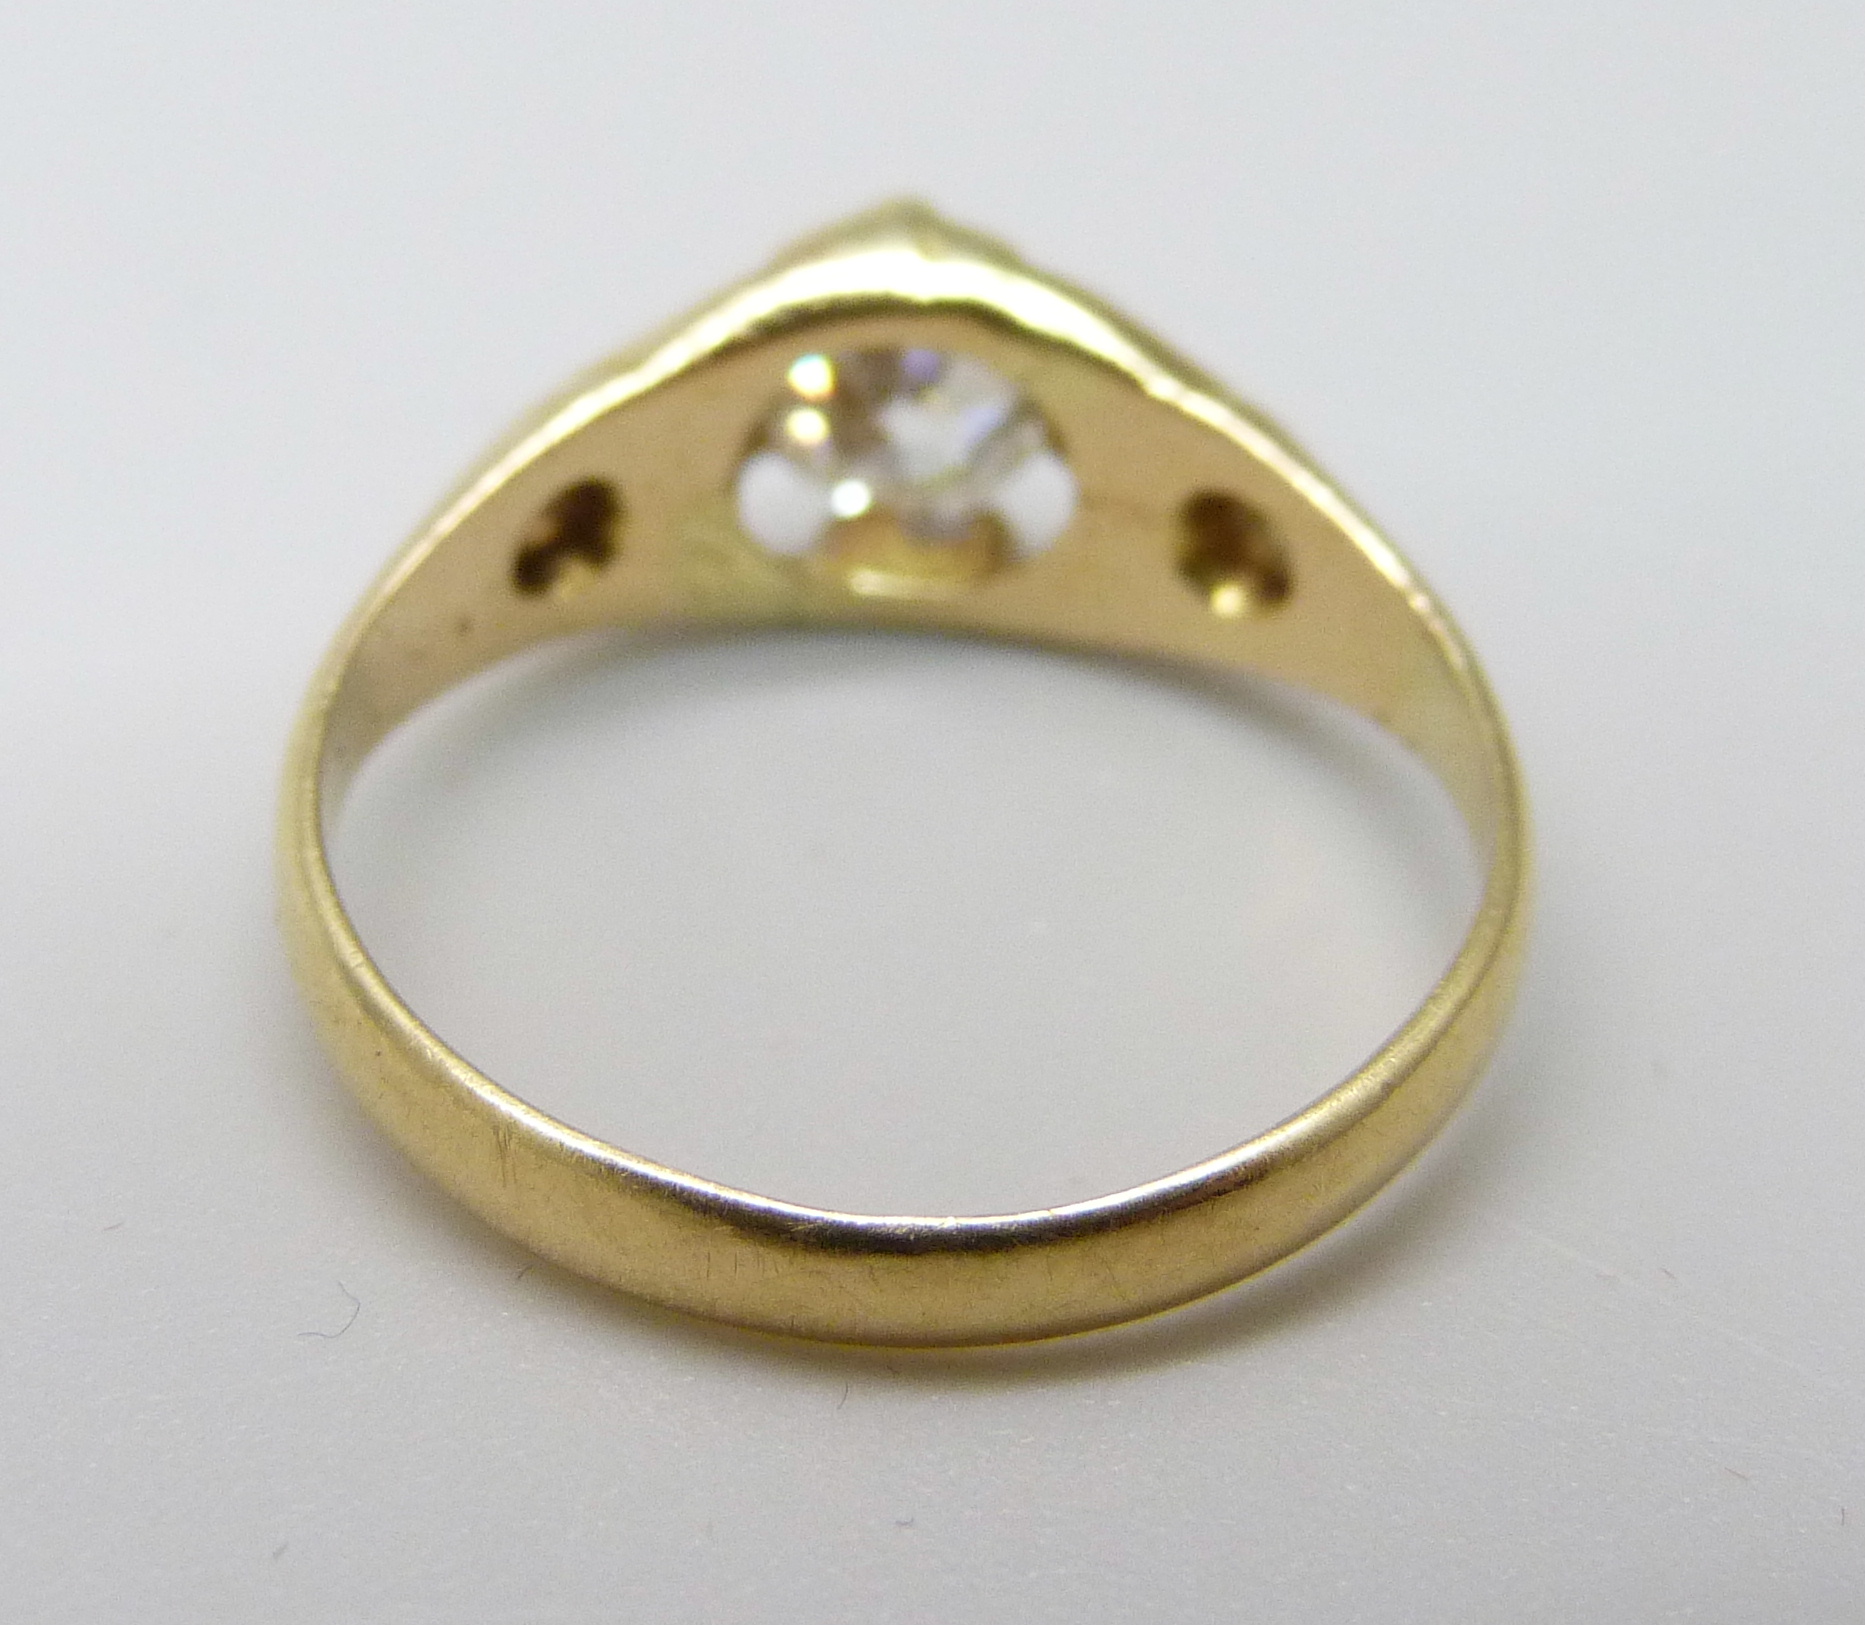 An 18ct gold and diamond solitaire ring, 2.2g, J, approximately 0.5ct diamond weight - Image 3 of 3